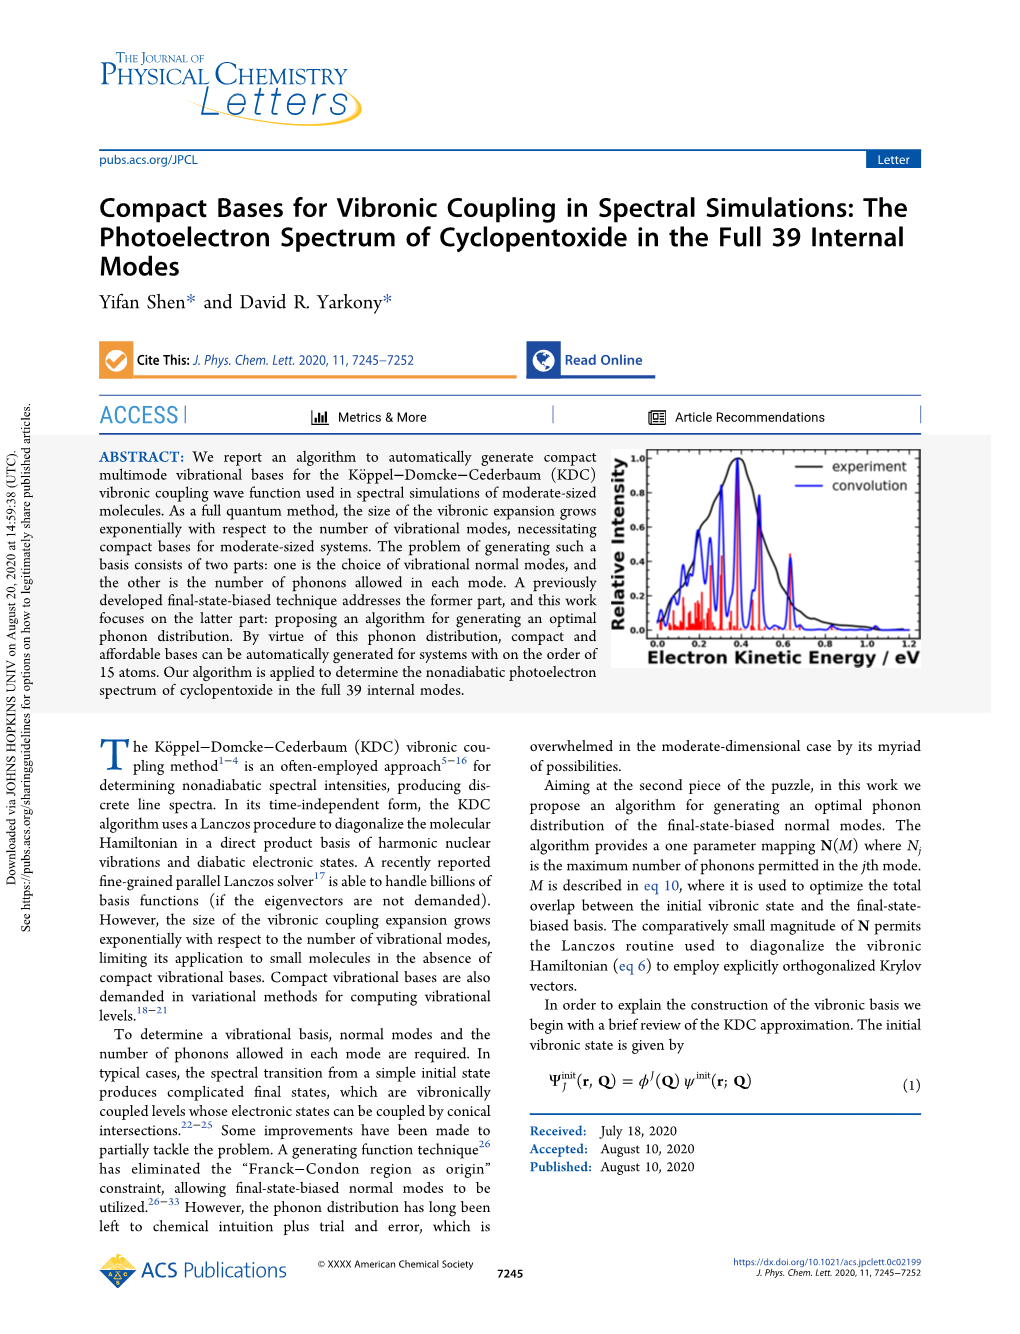 Compact Bases for Vibronic Coupling in Spectral Simulations: the Photoelectron Spectrum of Cyclopentoxide in the Full 39 Internal Modes Yifan Shen* and David R